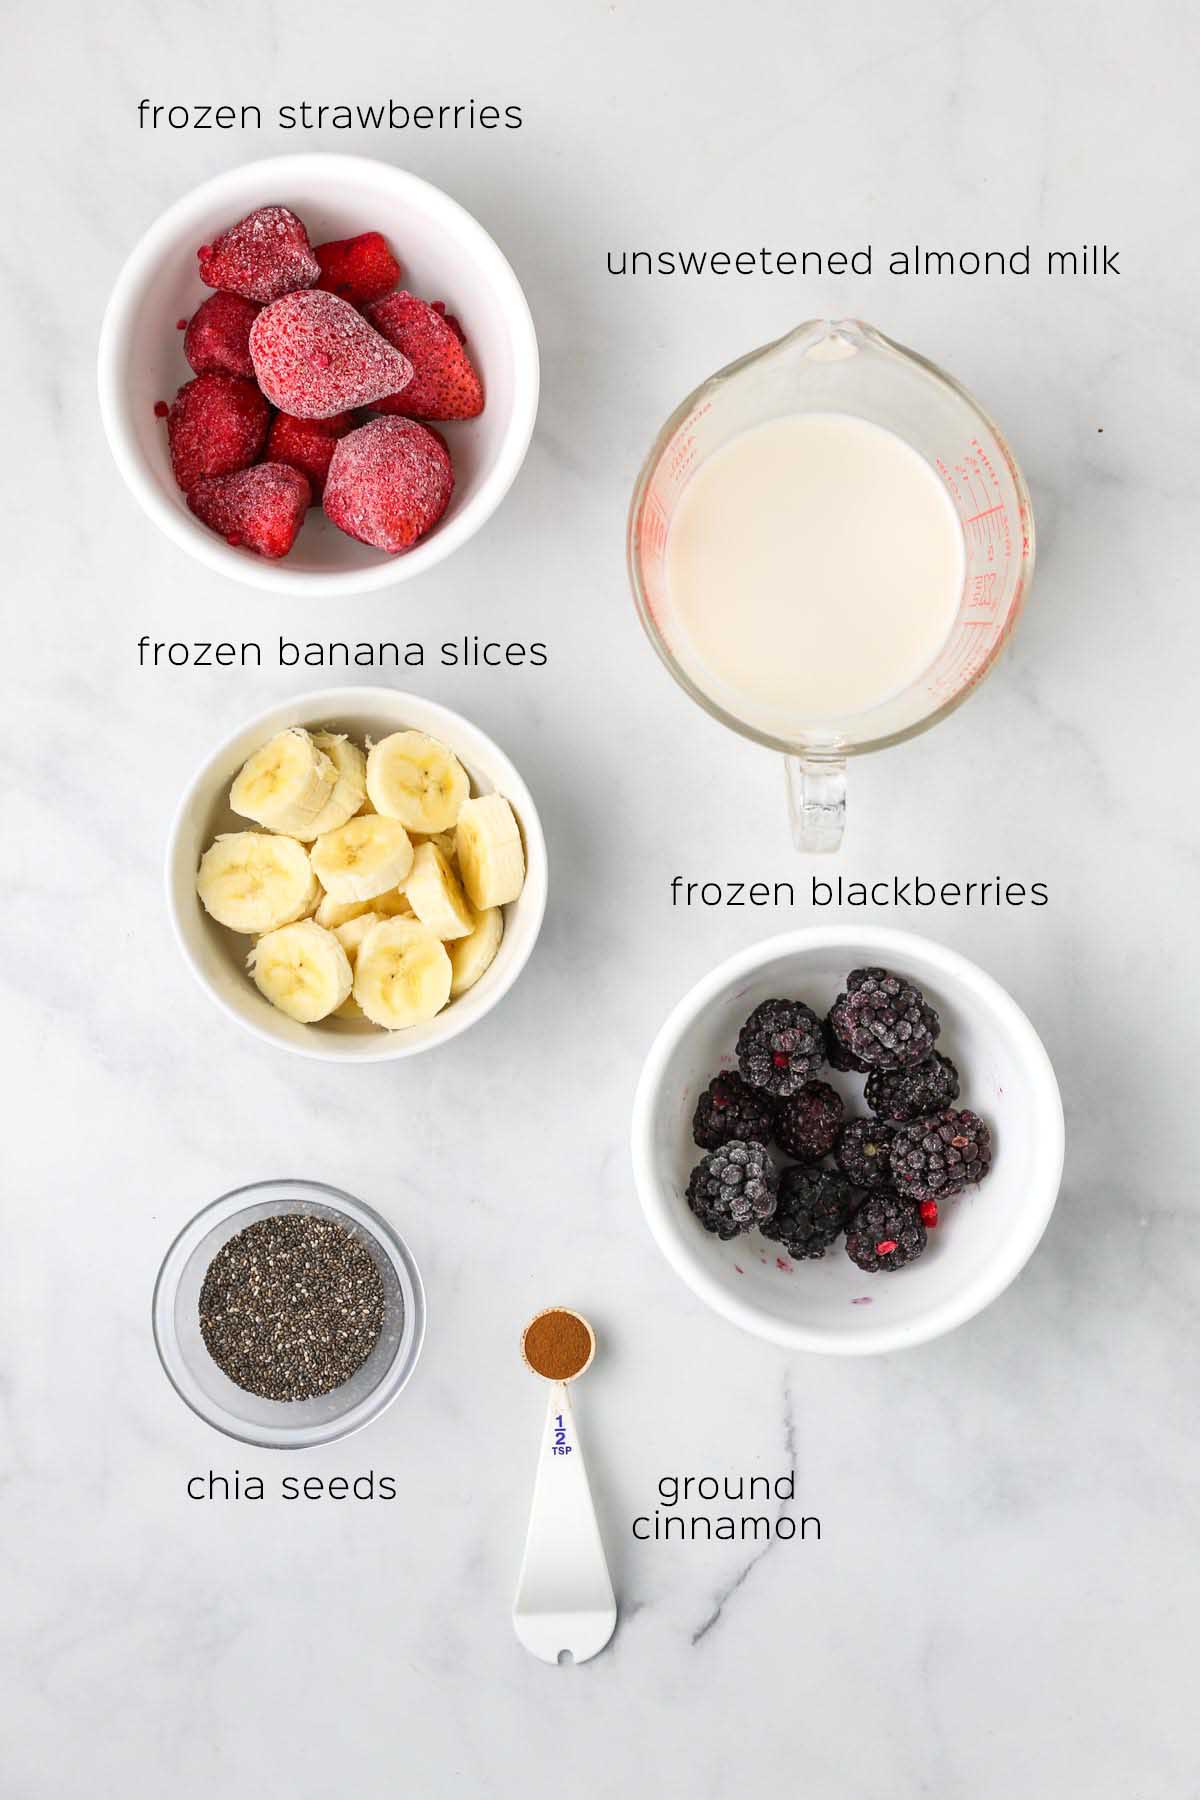 all ingredients to make the smoothie prepared in small bowls and measuring cups on a marble surface.